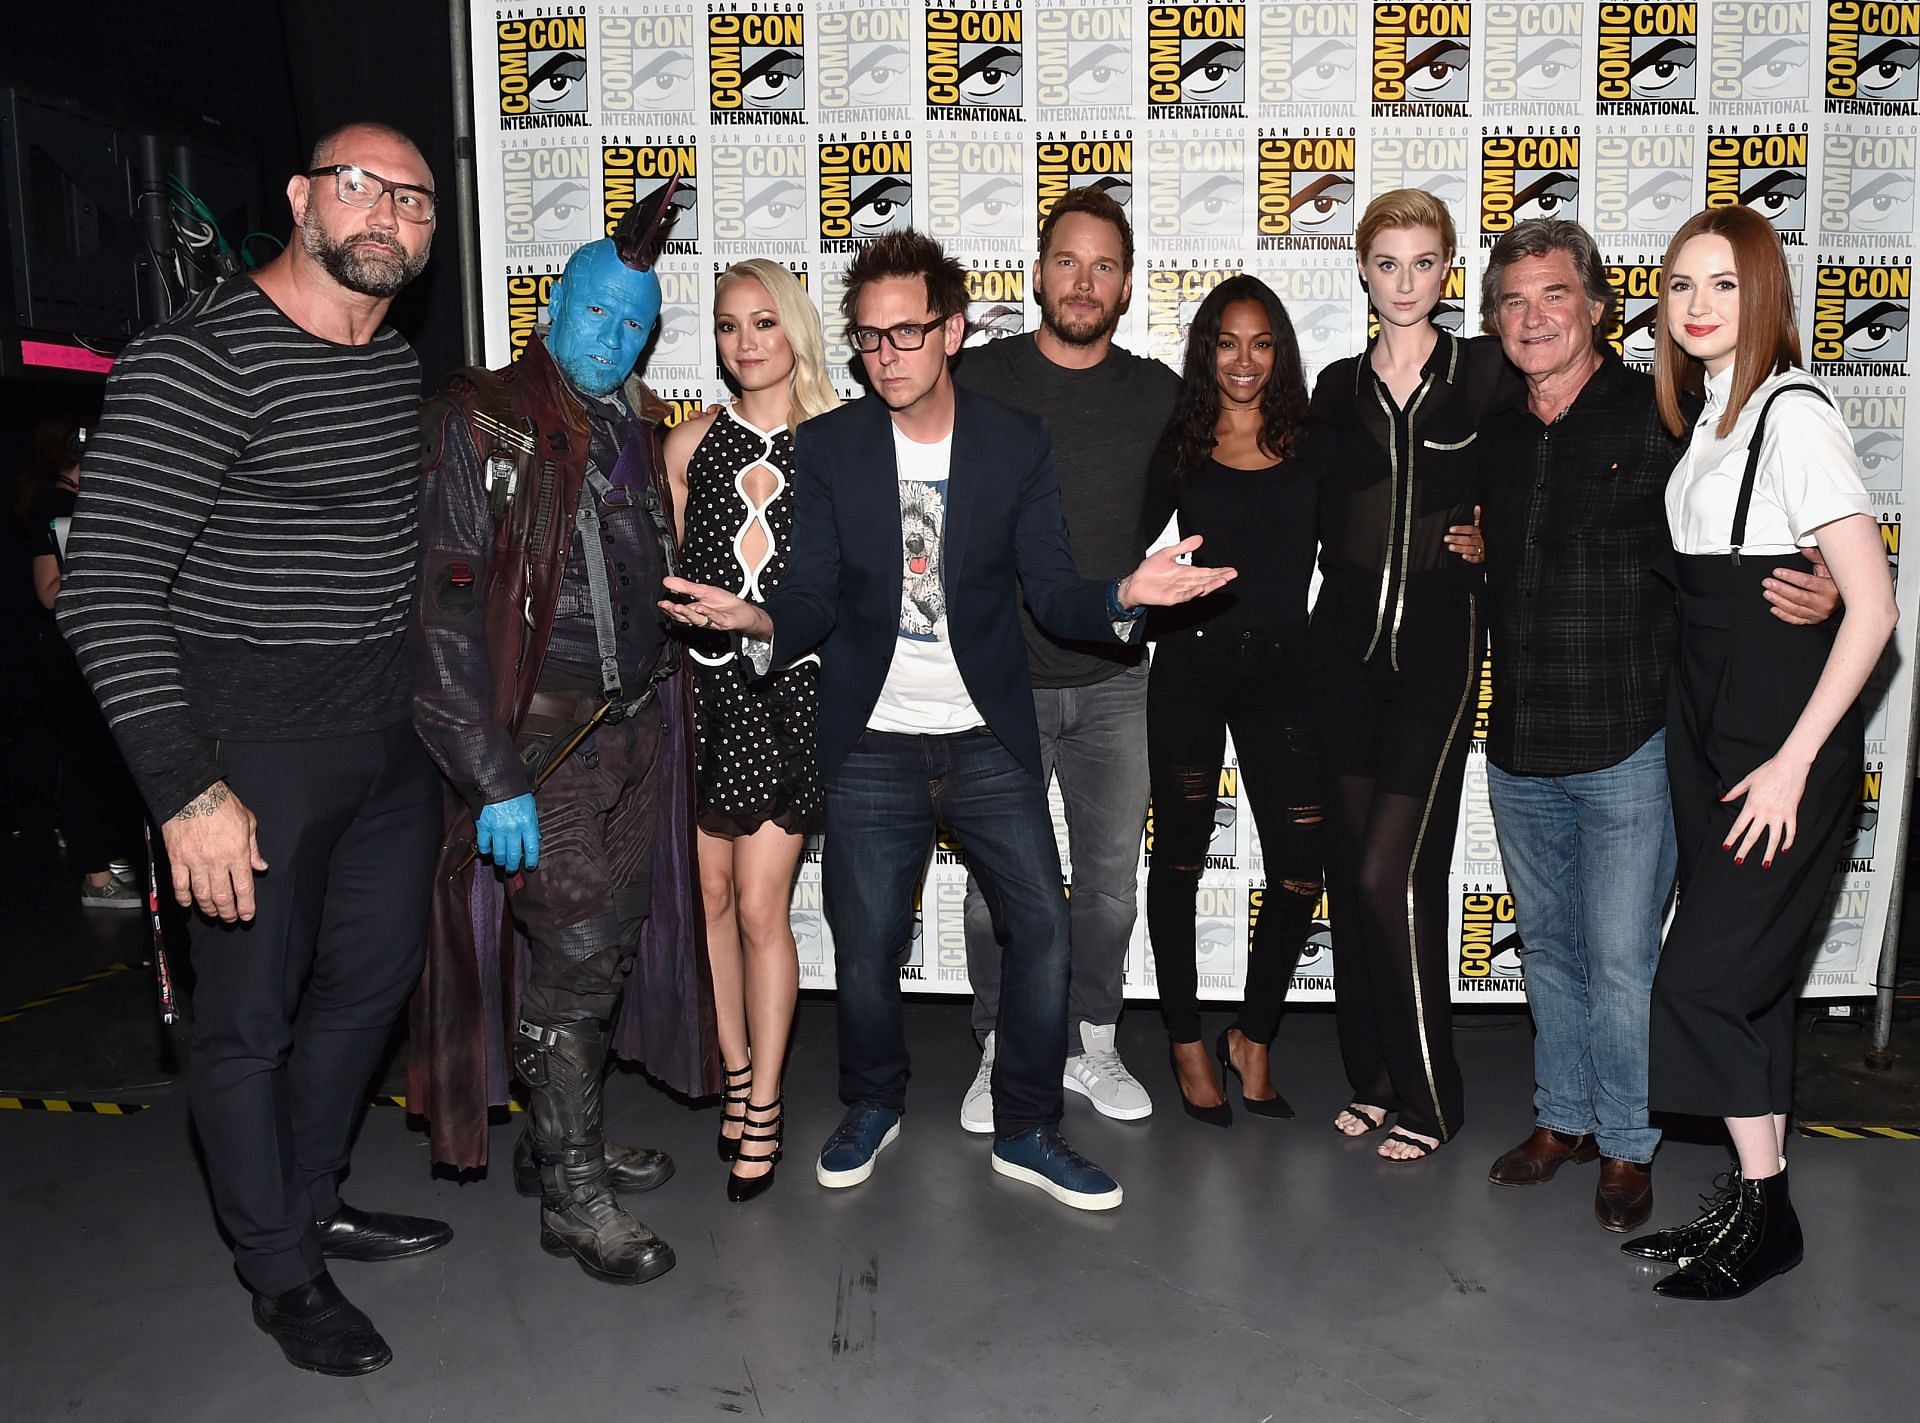 Cast members of Guardians of the Galaxy showing support for Gunn (Image via Getty)